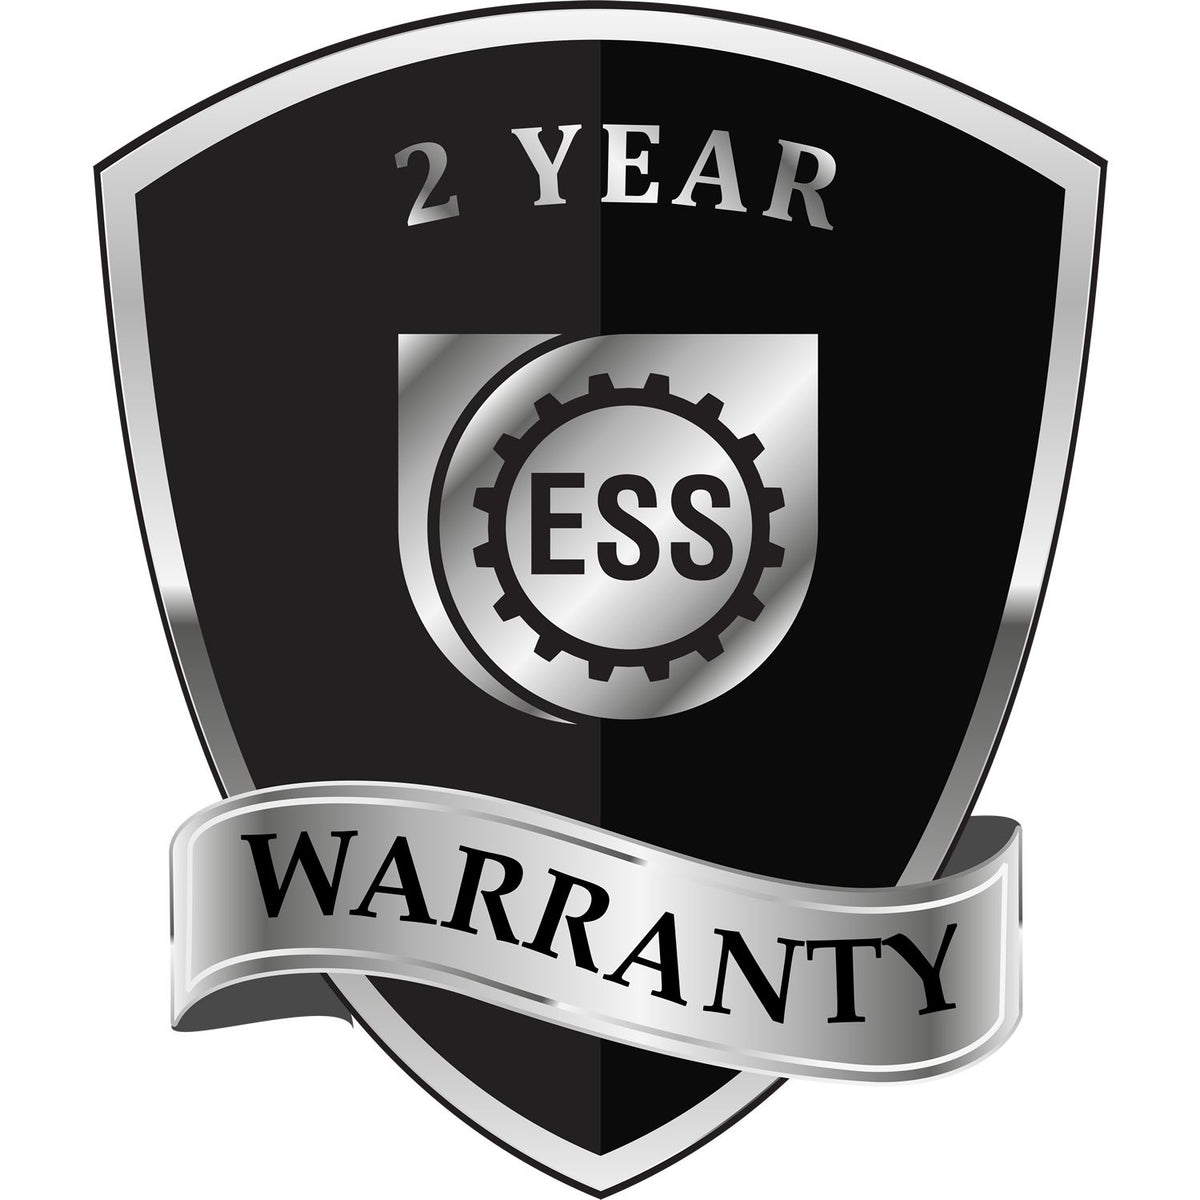 A black and silver badge or emblem showing warranty information for the Handheld Nevada Professional Geologist Embosser